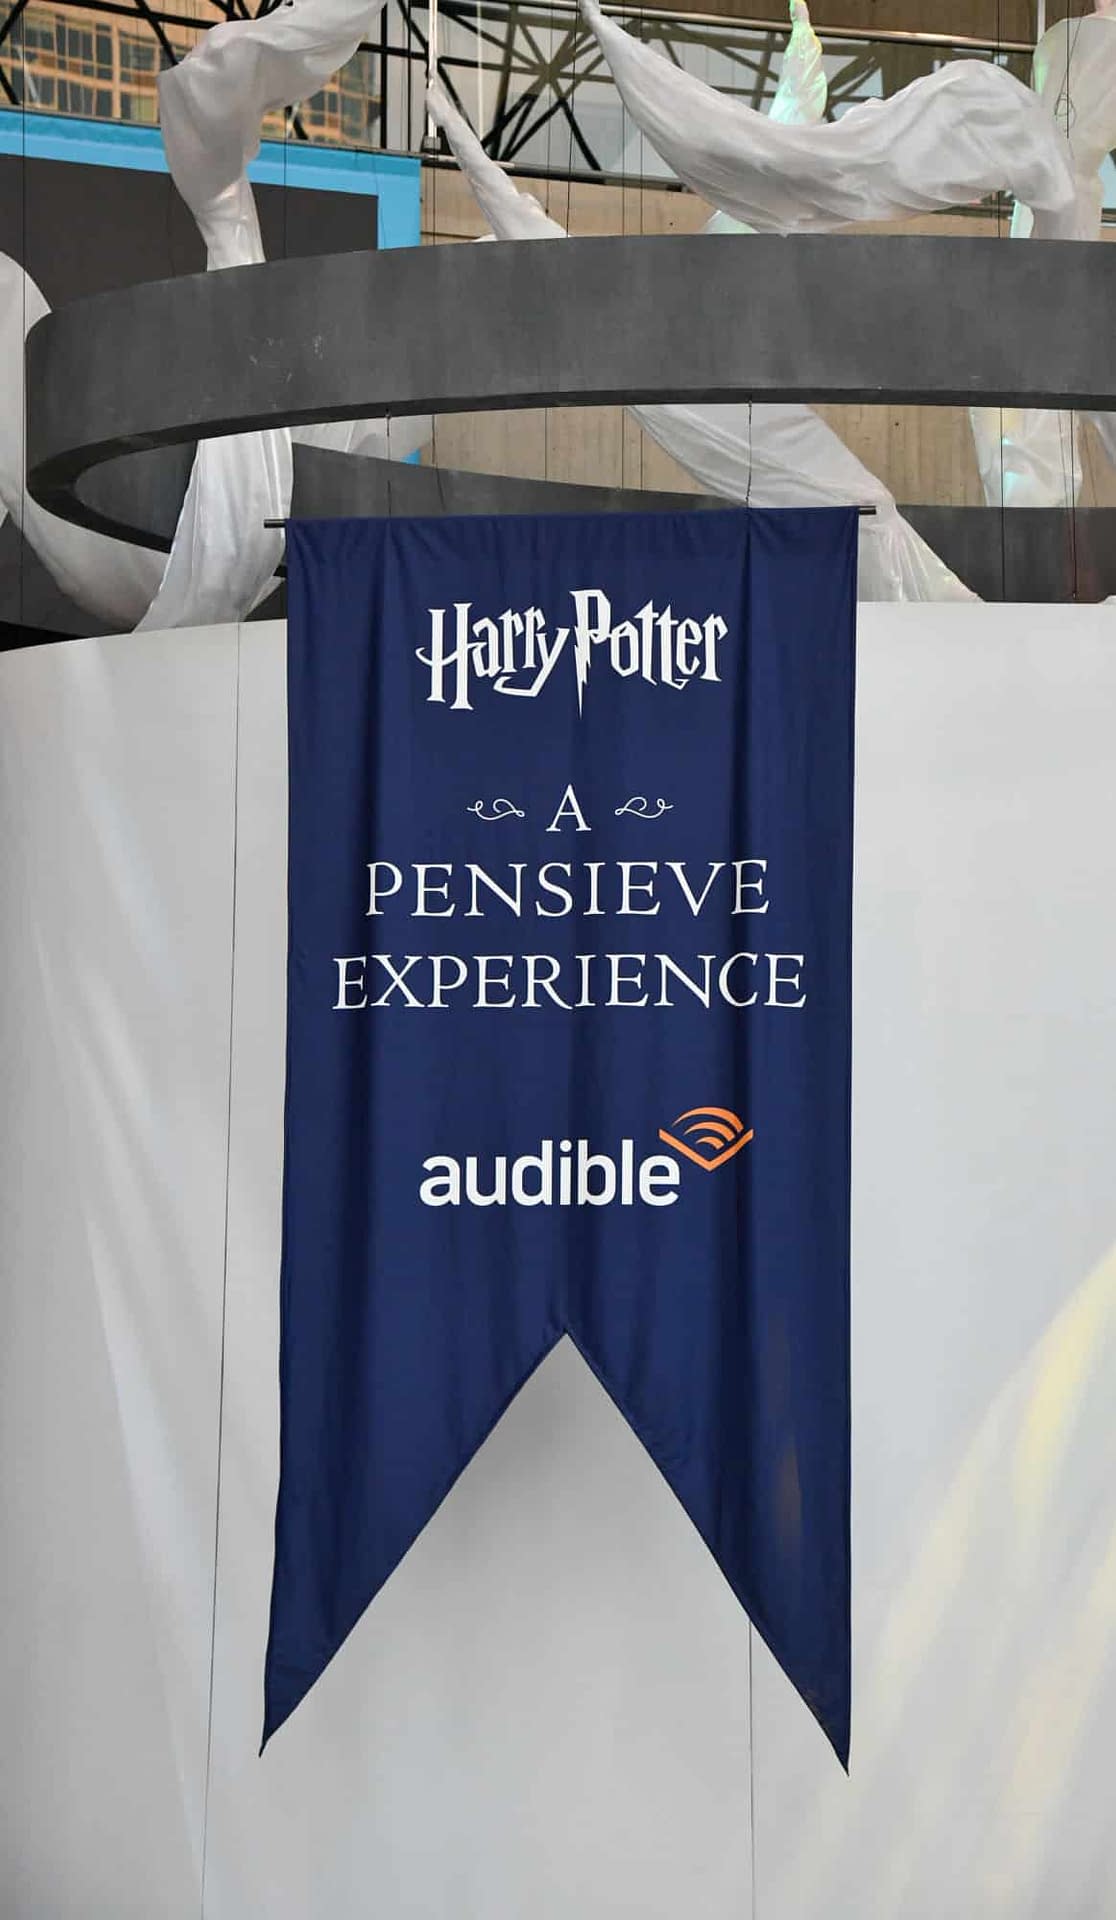 Relive the Magic Again at the Harry Potter Pensieve Experience at NYCC